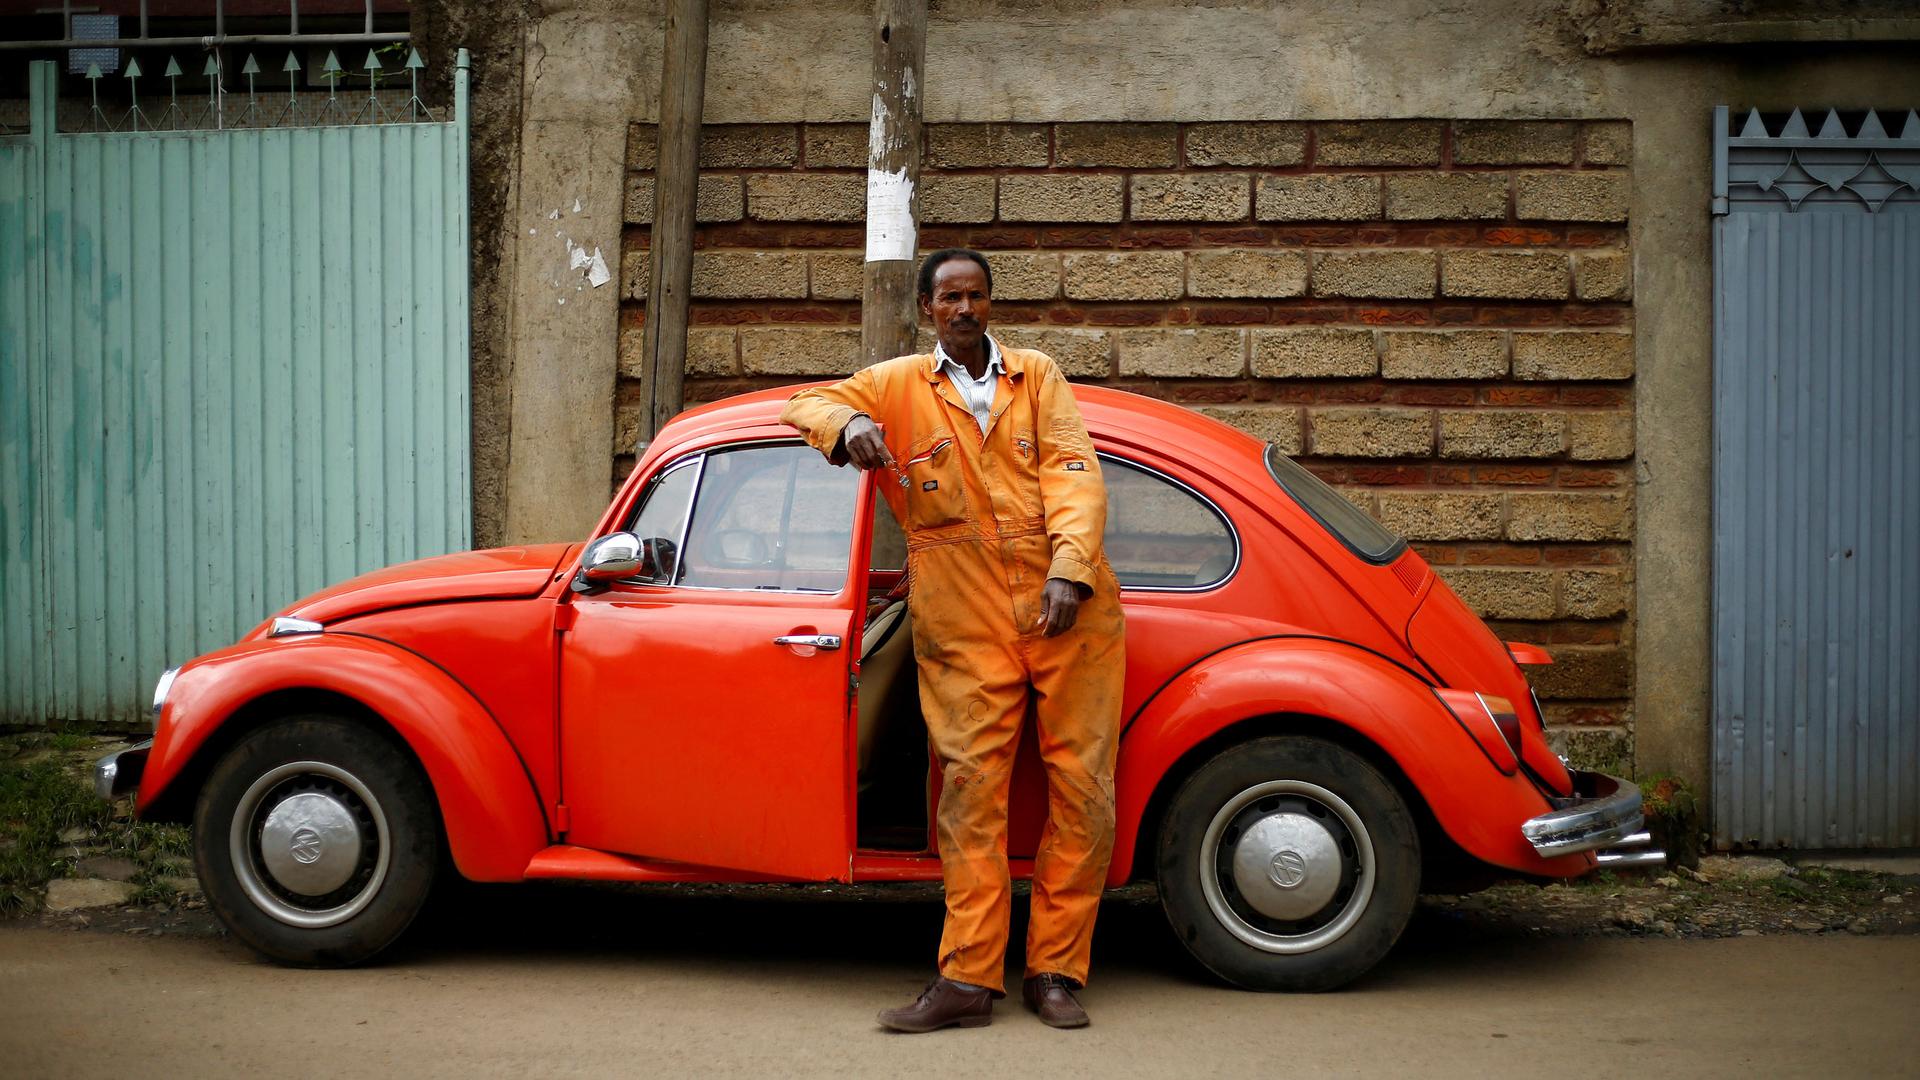 A man in an orange jump suit leans his arm on a red 1965 model Volkswagen Beetle car.